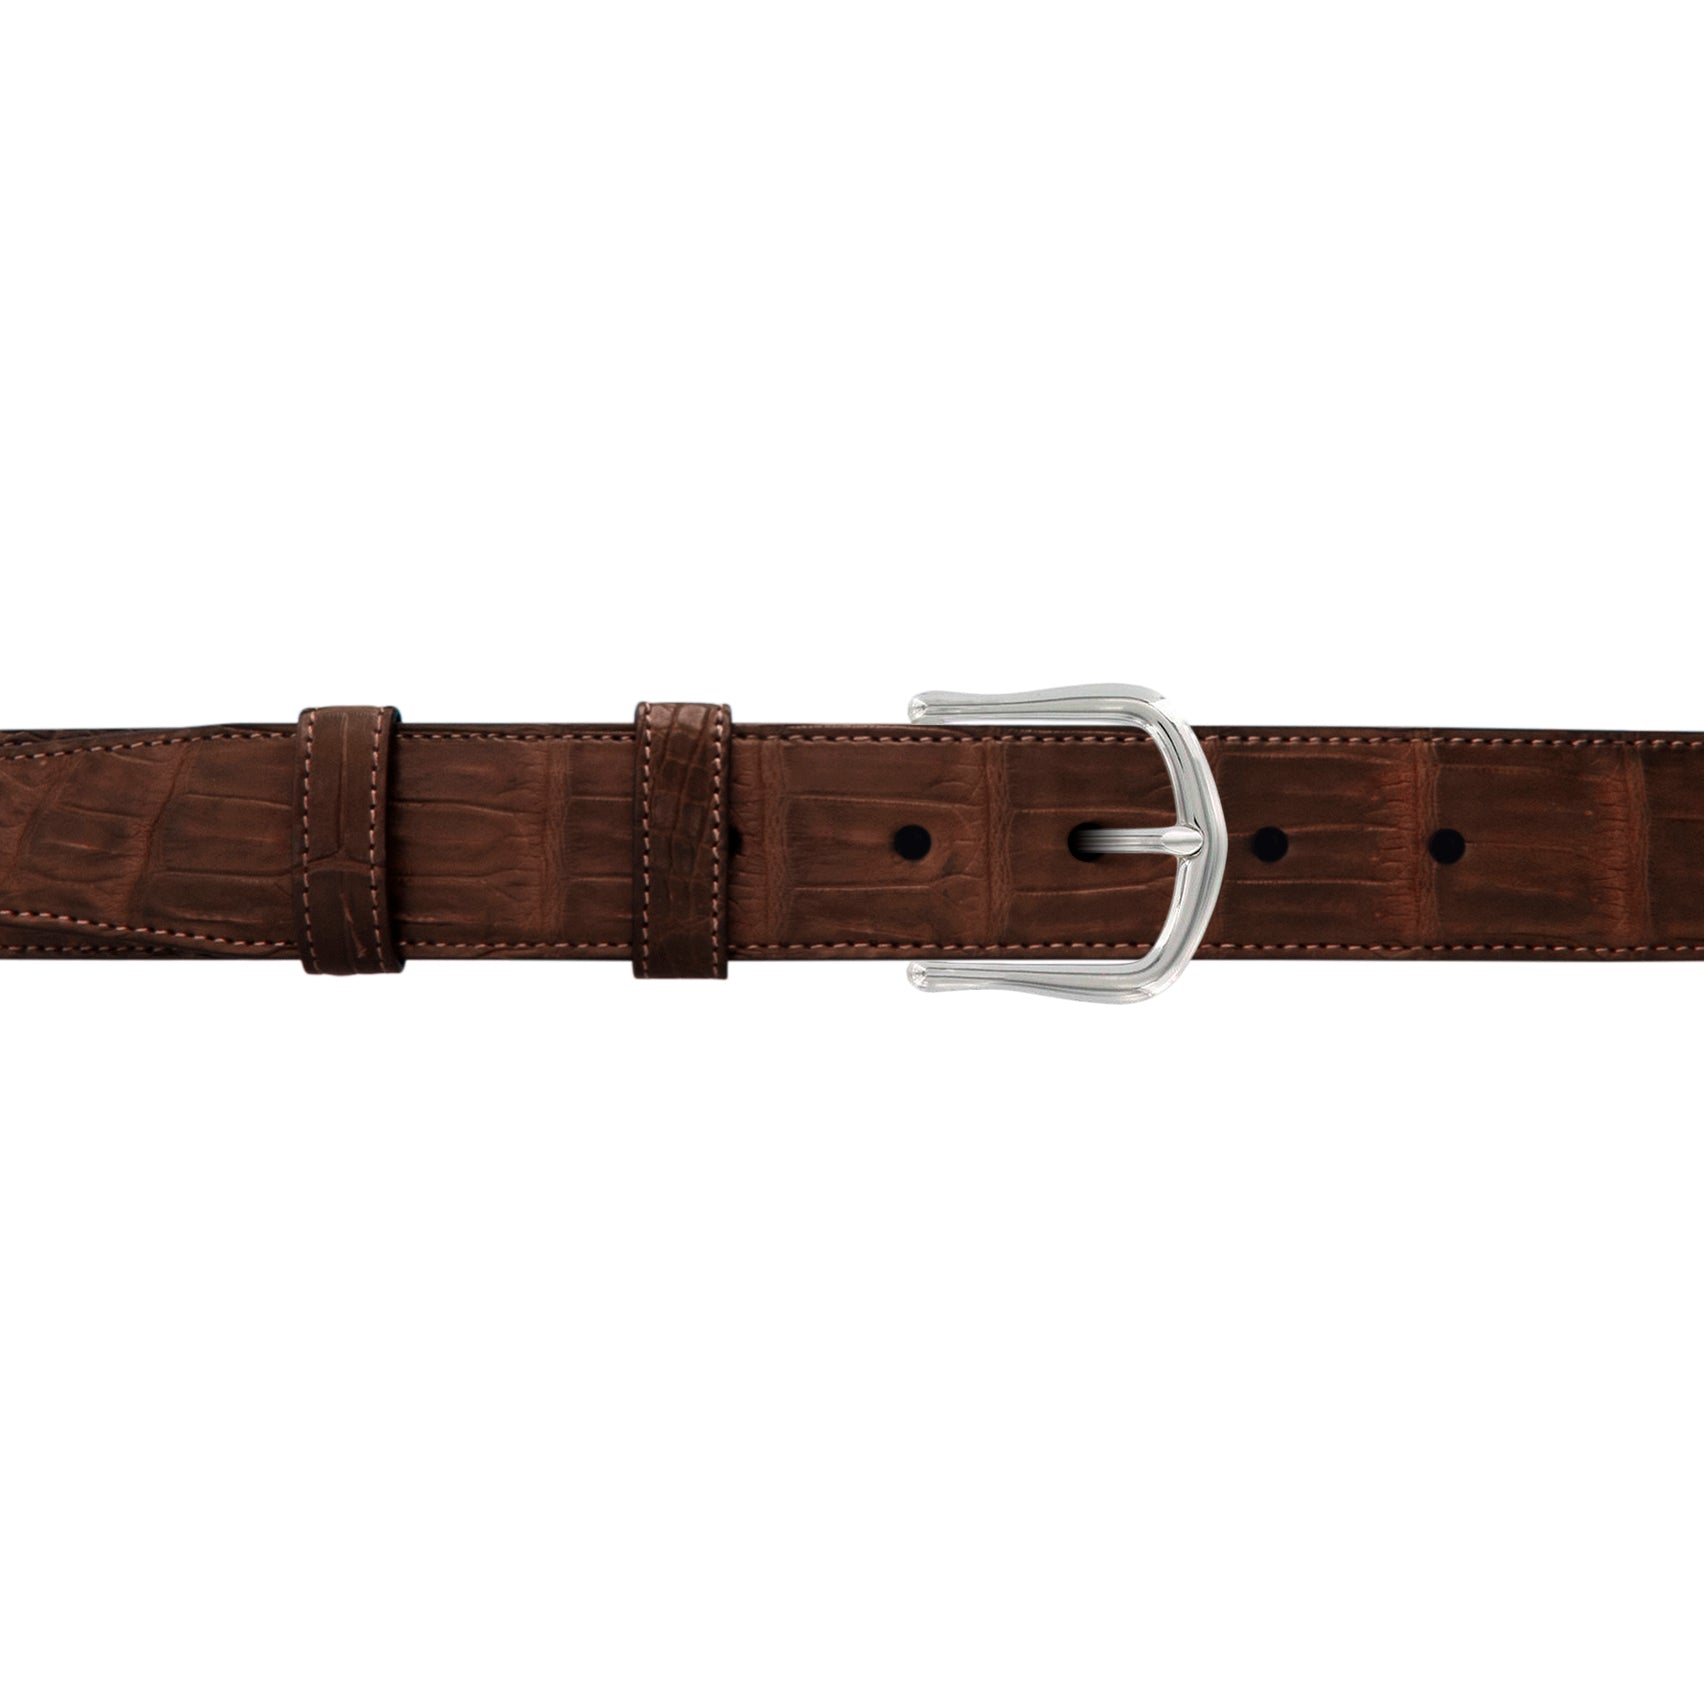 1 1/4" Cognac Classic Belt with Derby Cocktail Buckle in Polished Nickel